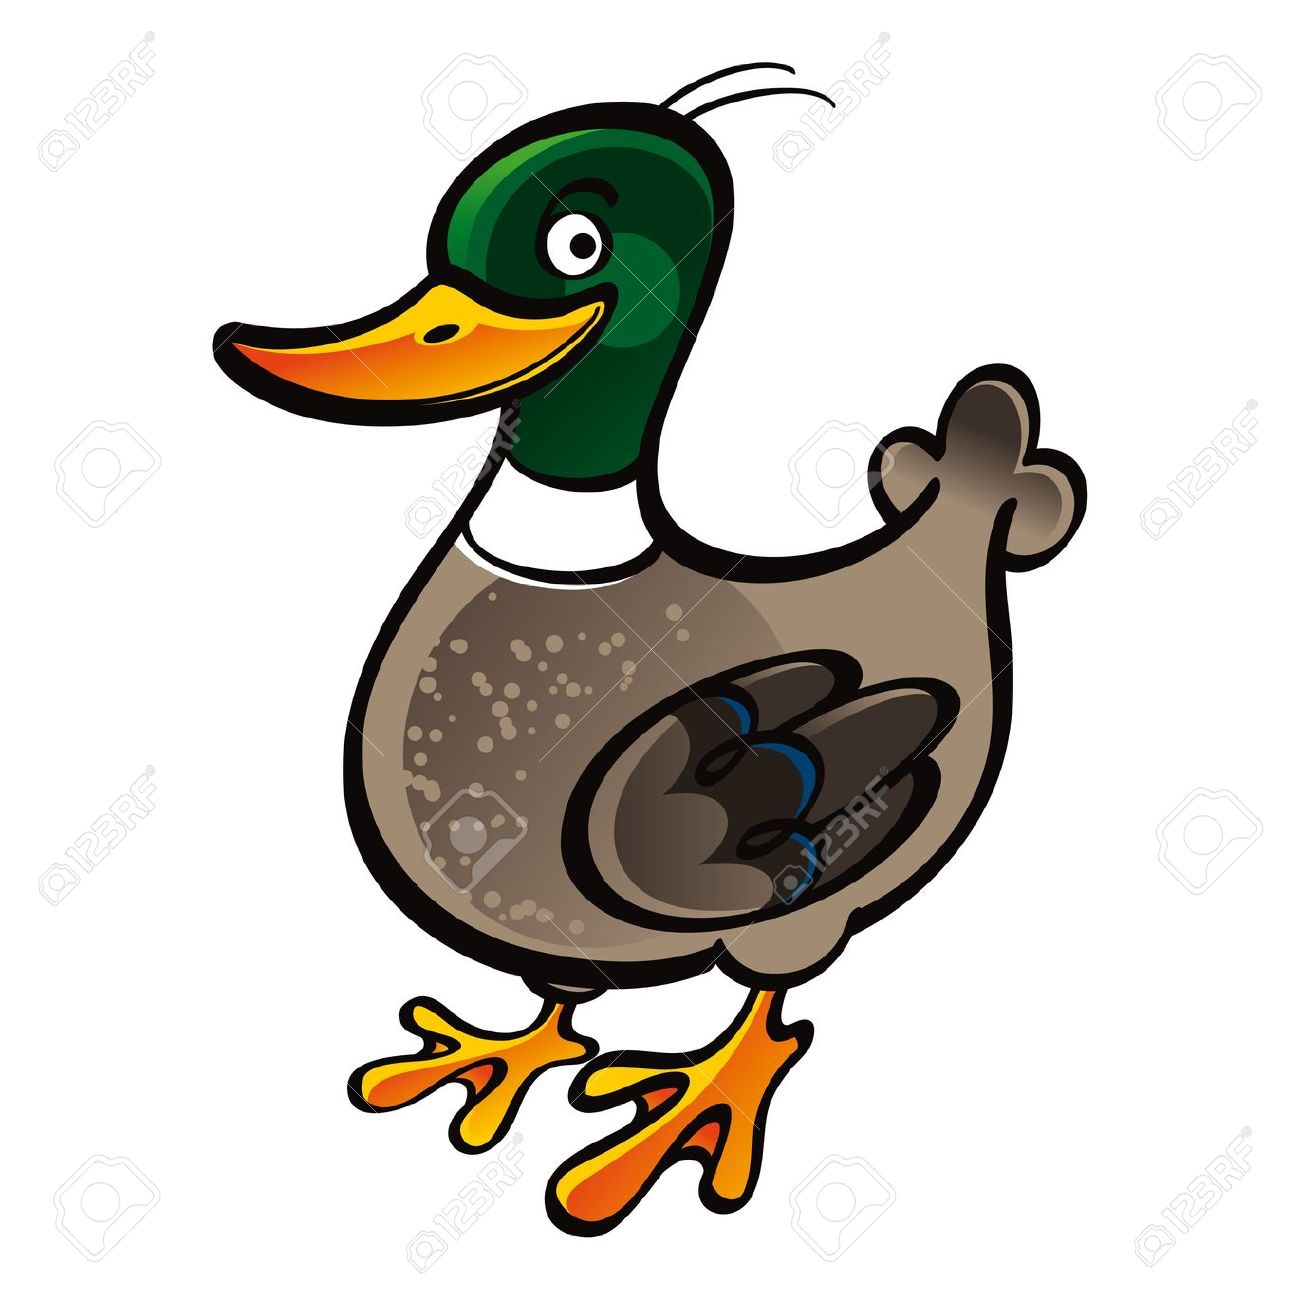 clipart flying duck - photo #17